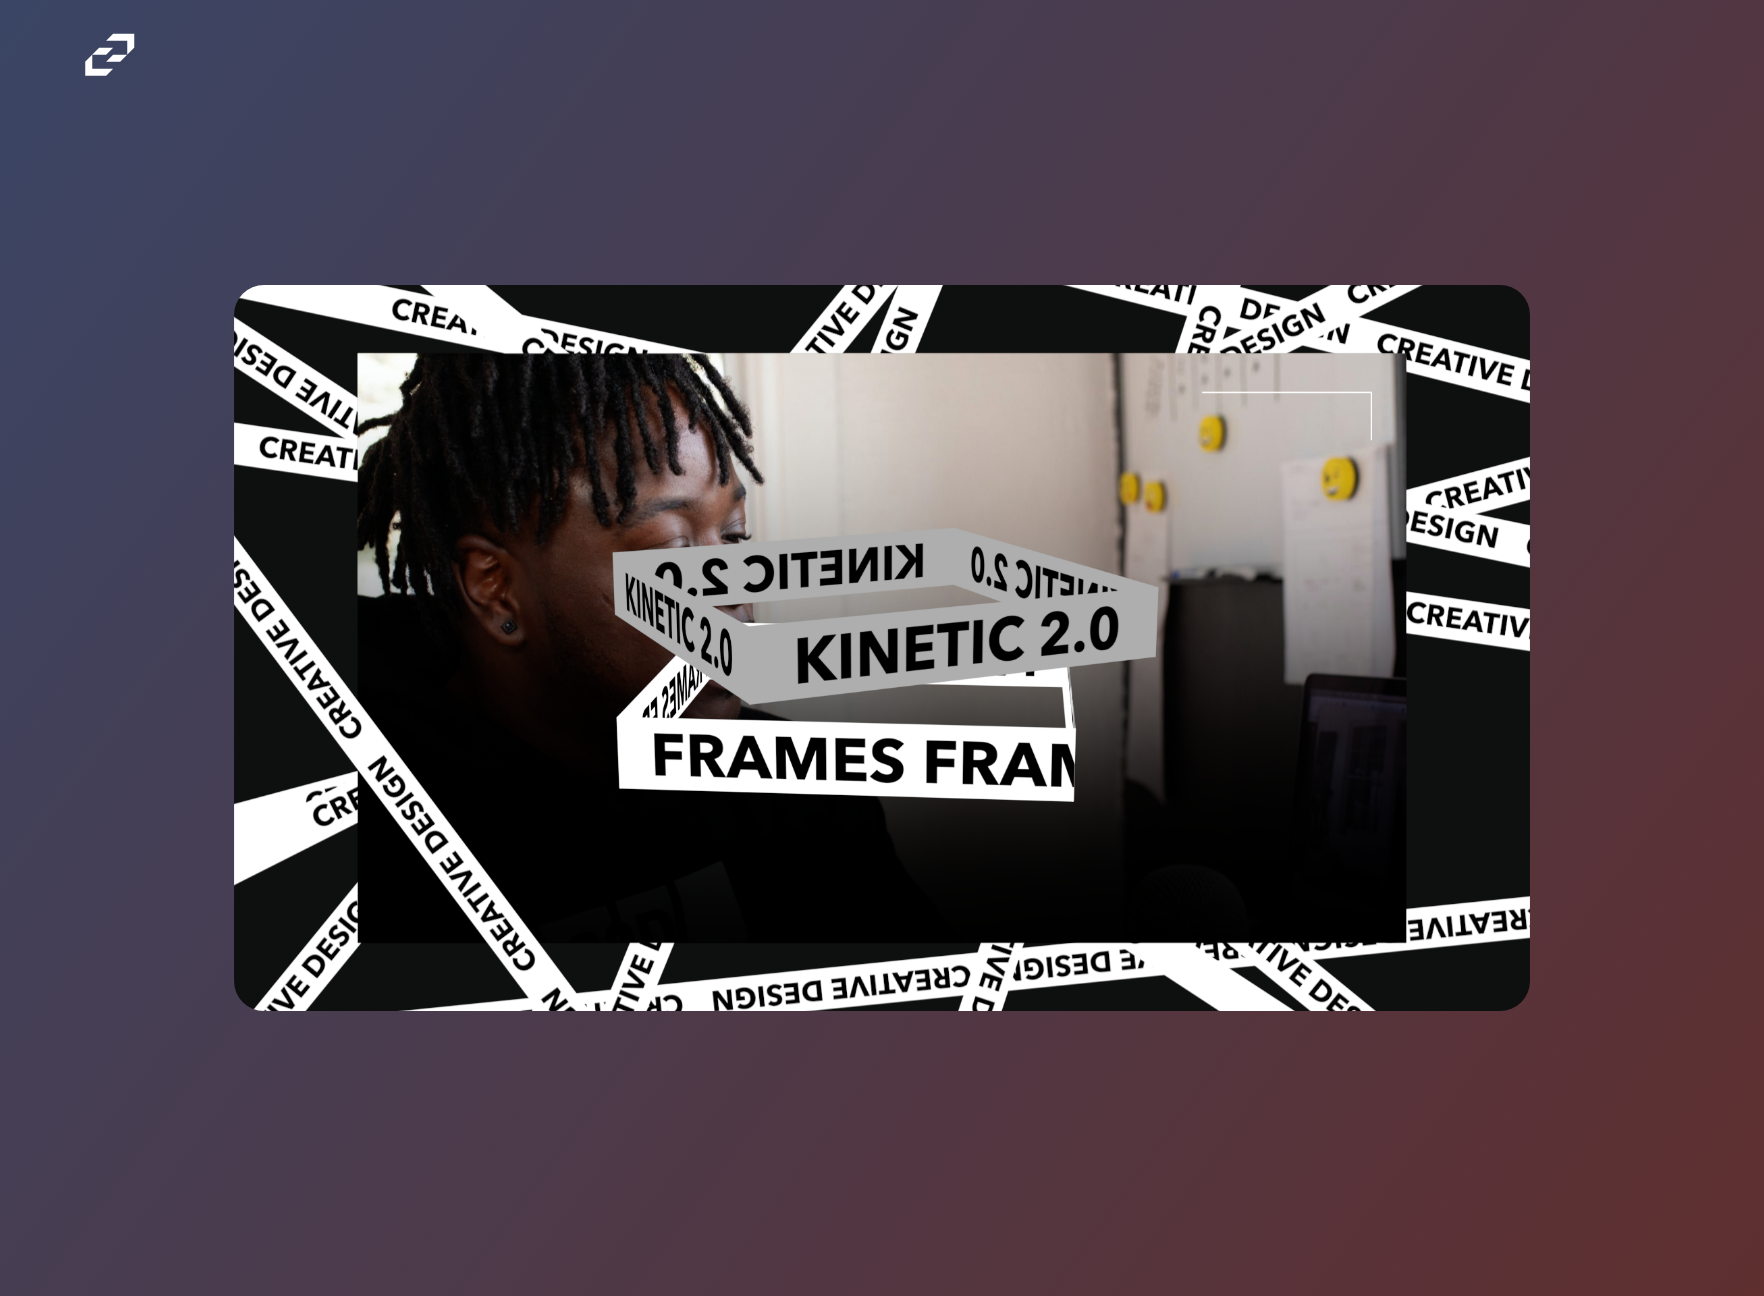 Kinetic Frames for Final Cut Pro, Premiere Pro  - Editable Video Templates - CCreation Store